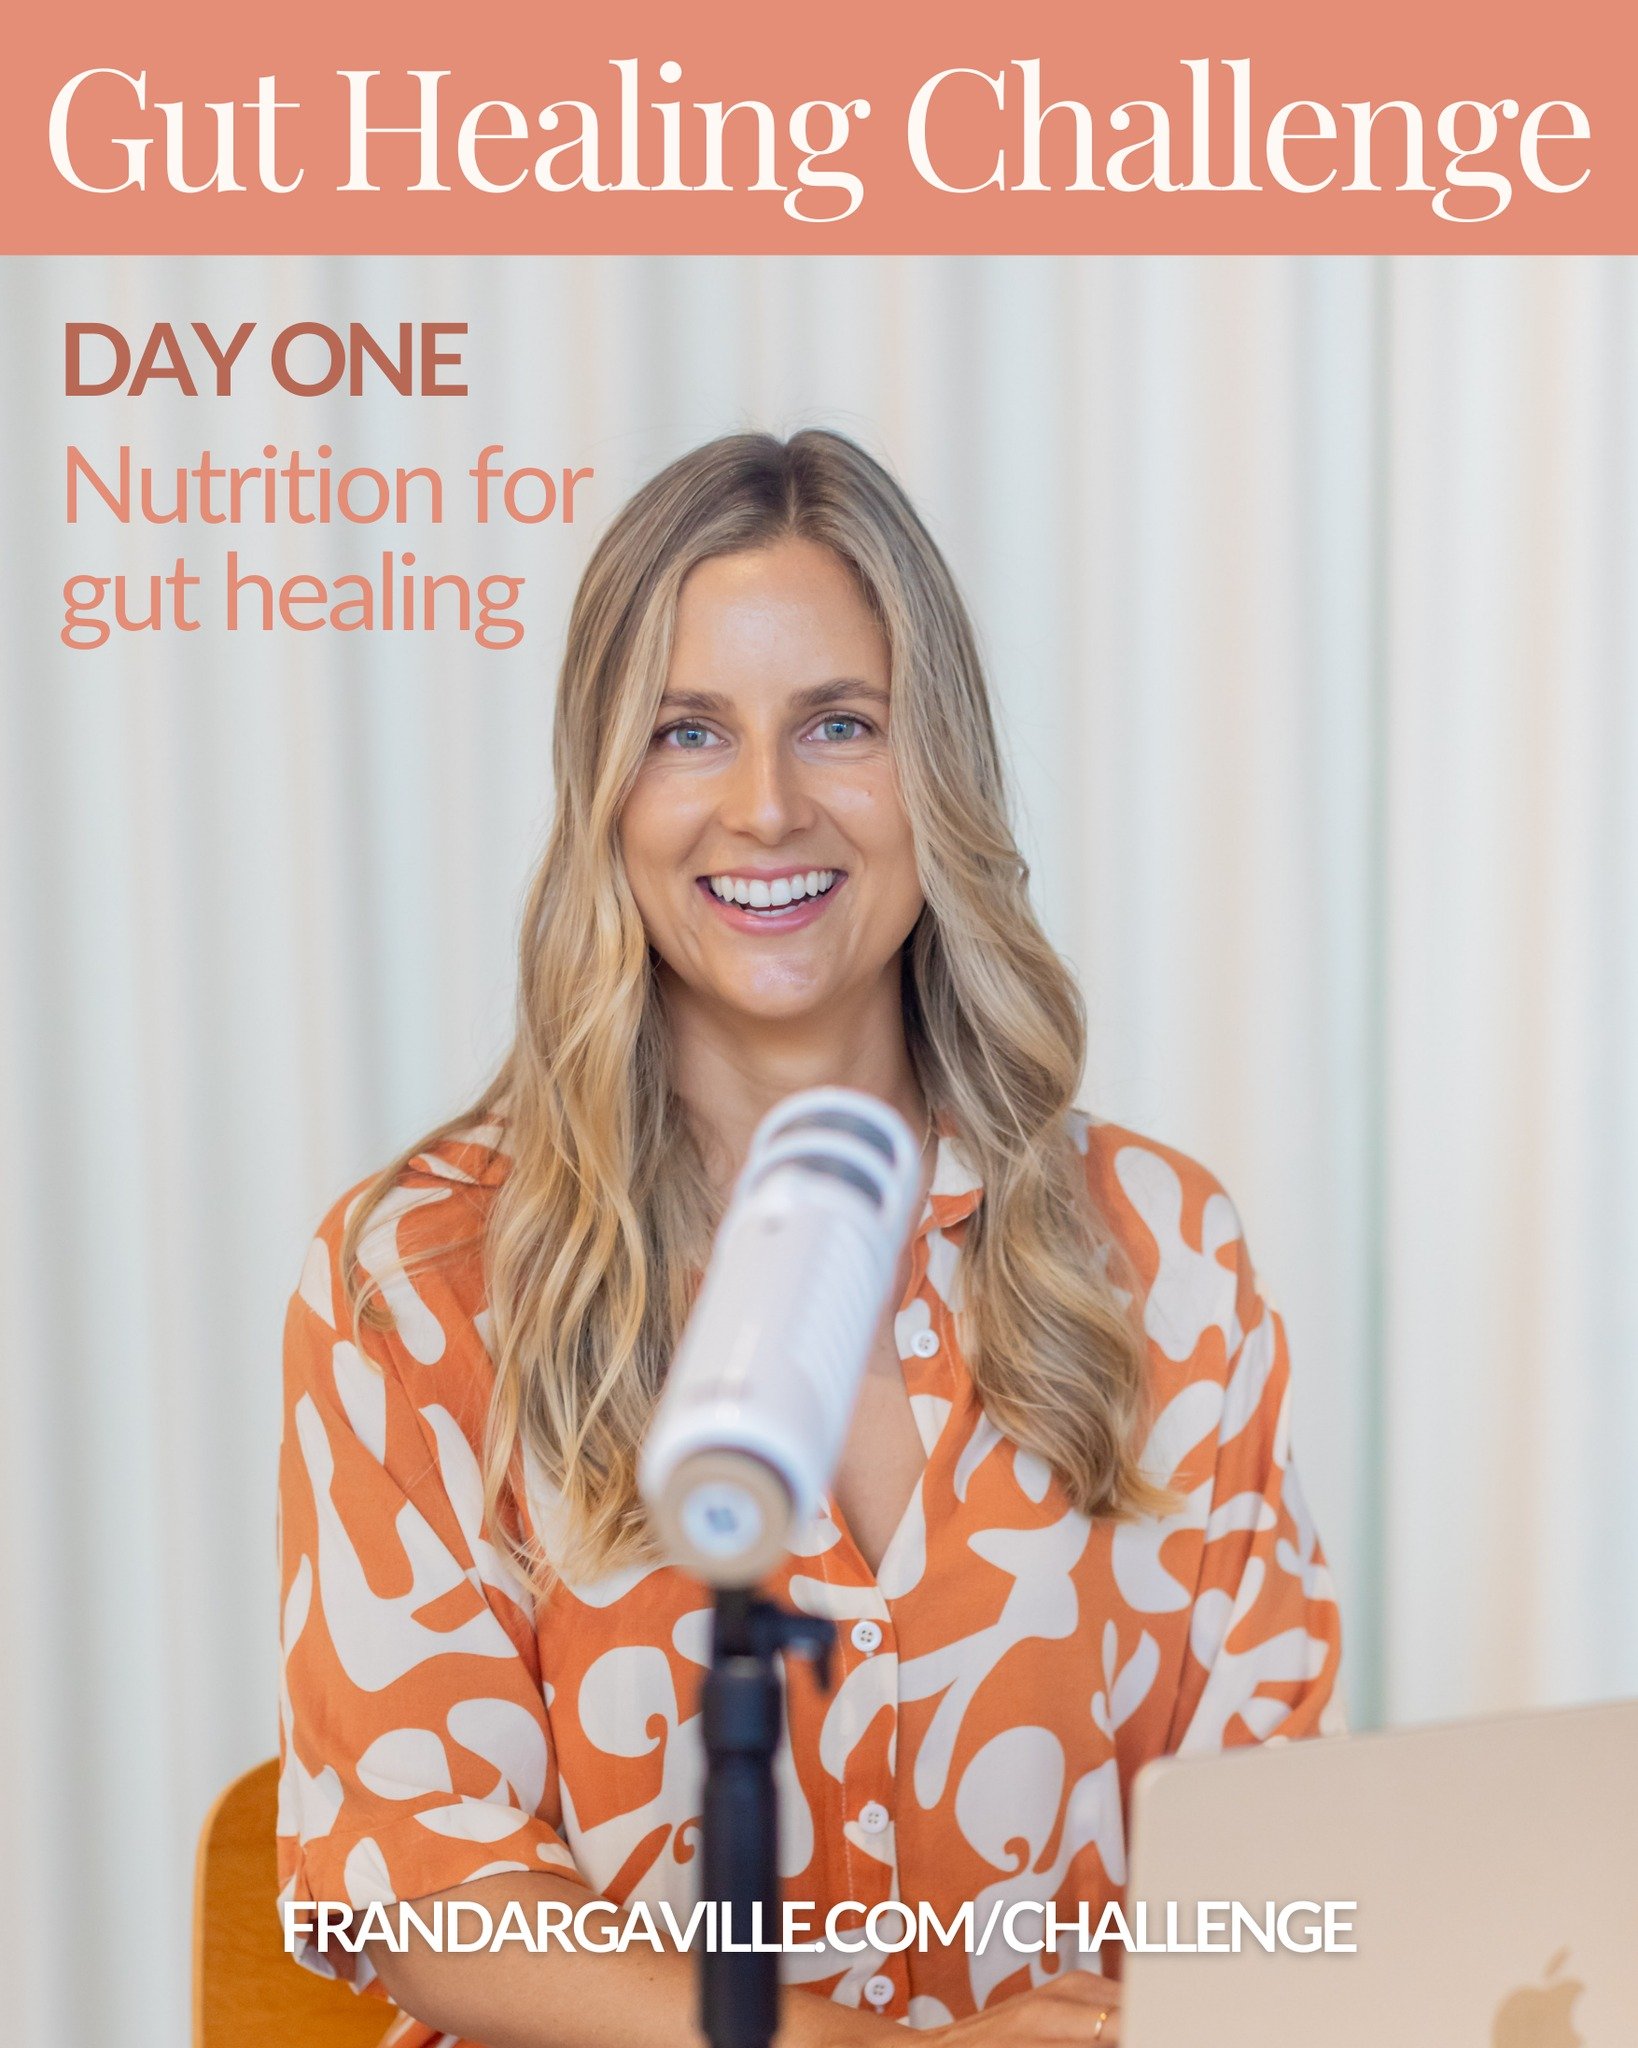 I had so much fun kicking off the 5-Day Gut Healing Challenge this morning! 🙌

We covered all things nutrition, including some key foundational pieces you *need* to know, along with targeted nutrition for gut healing. 

This value-packed free challe